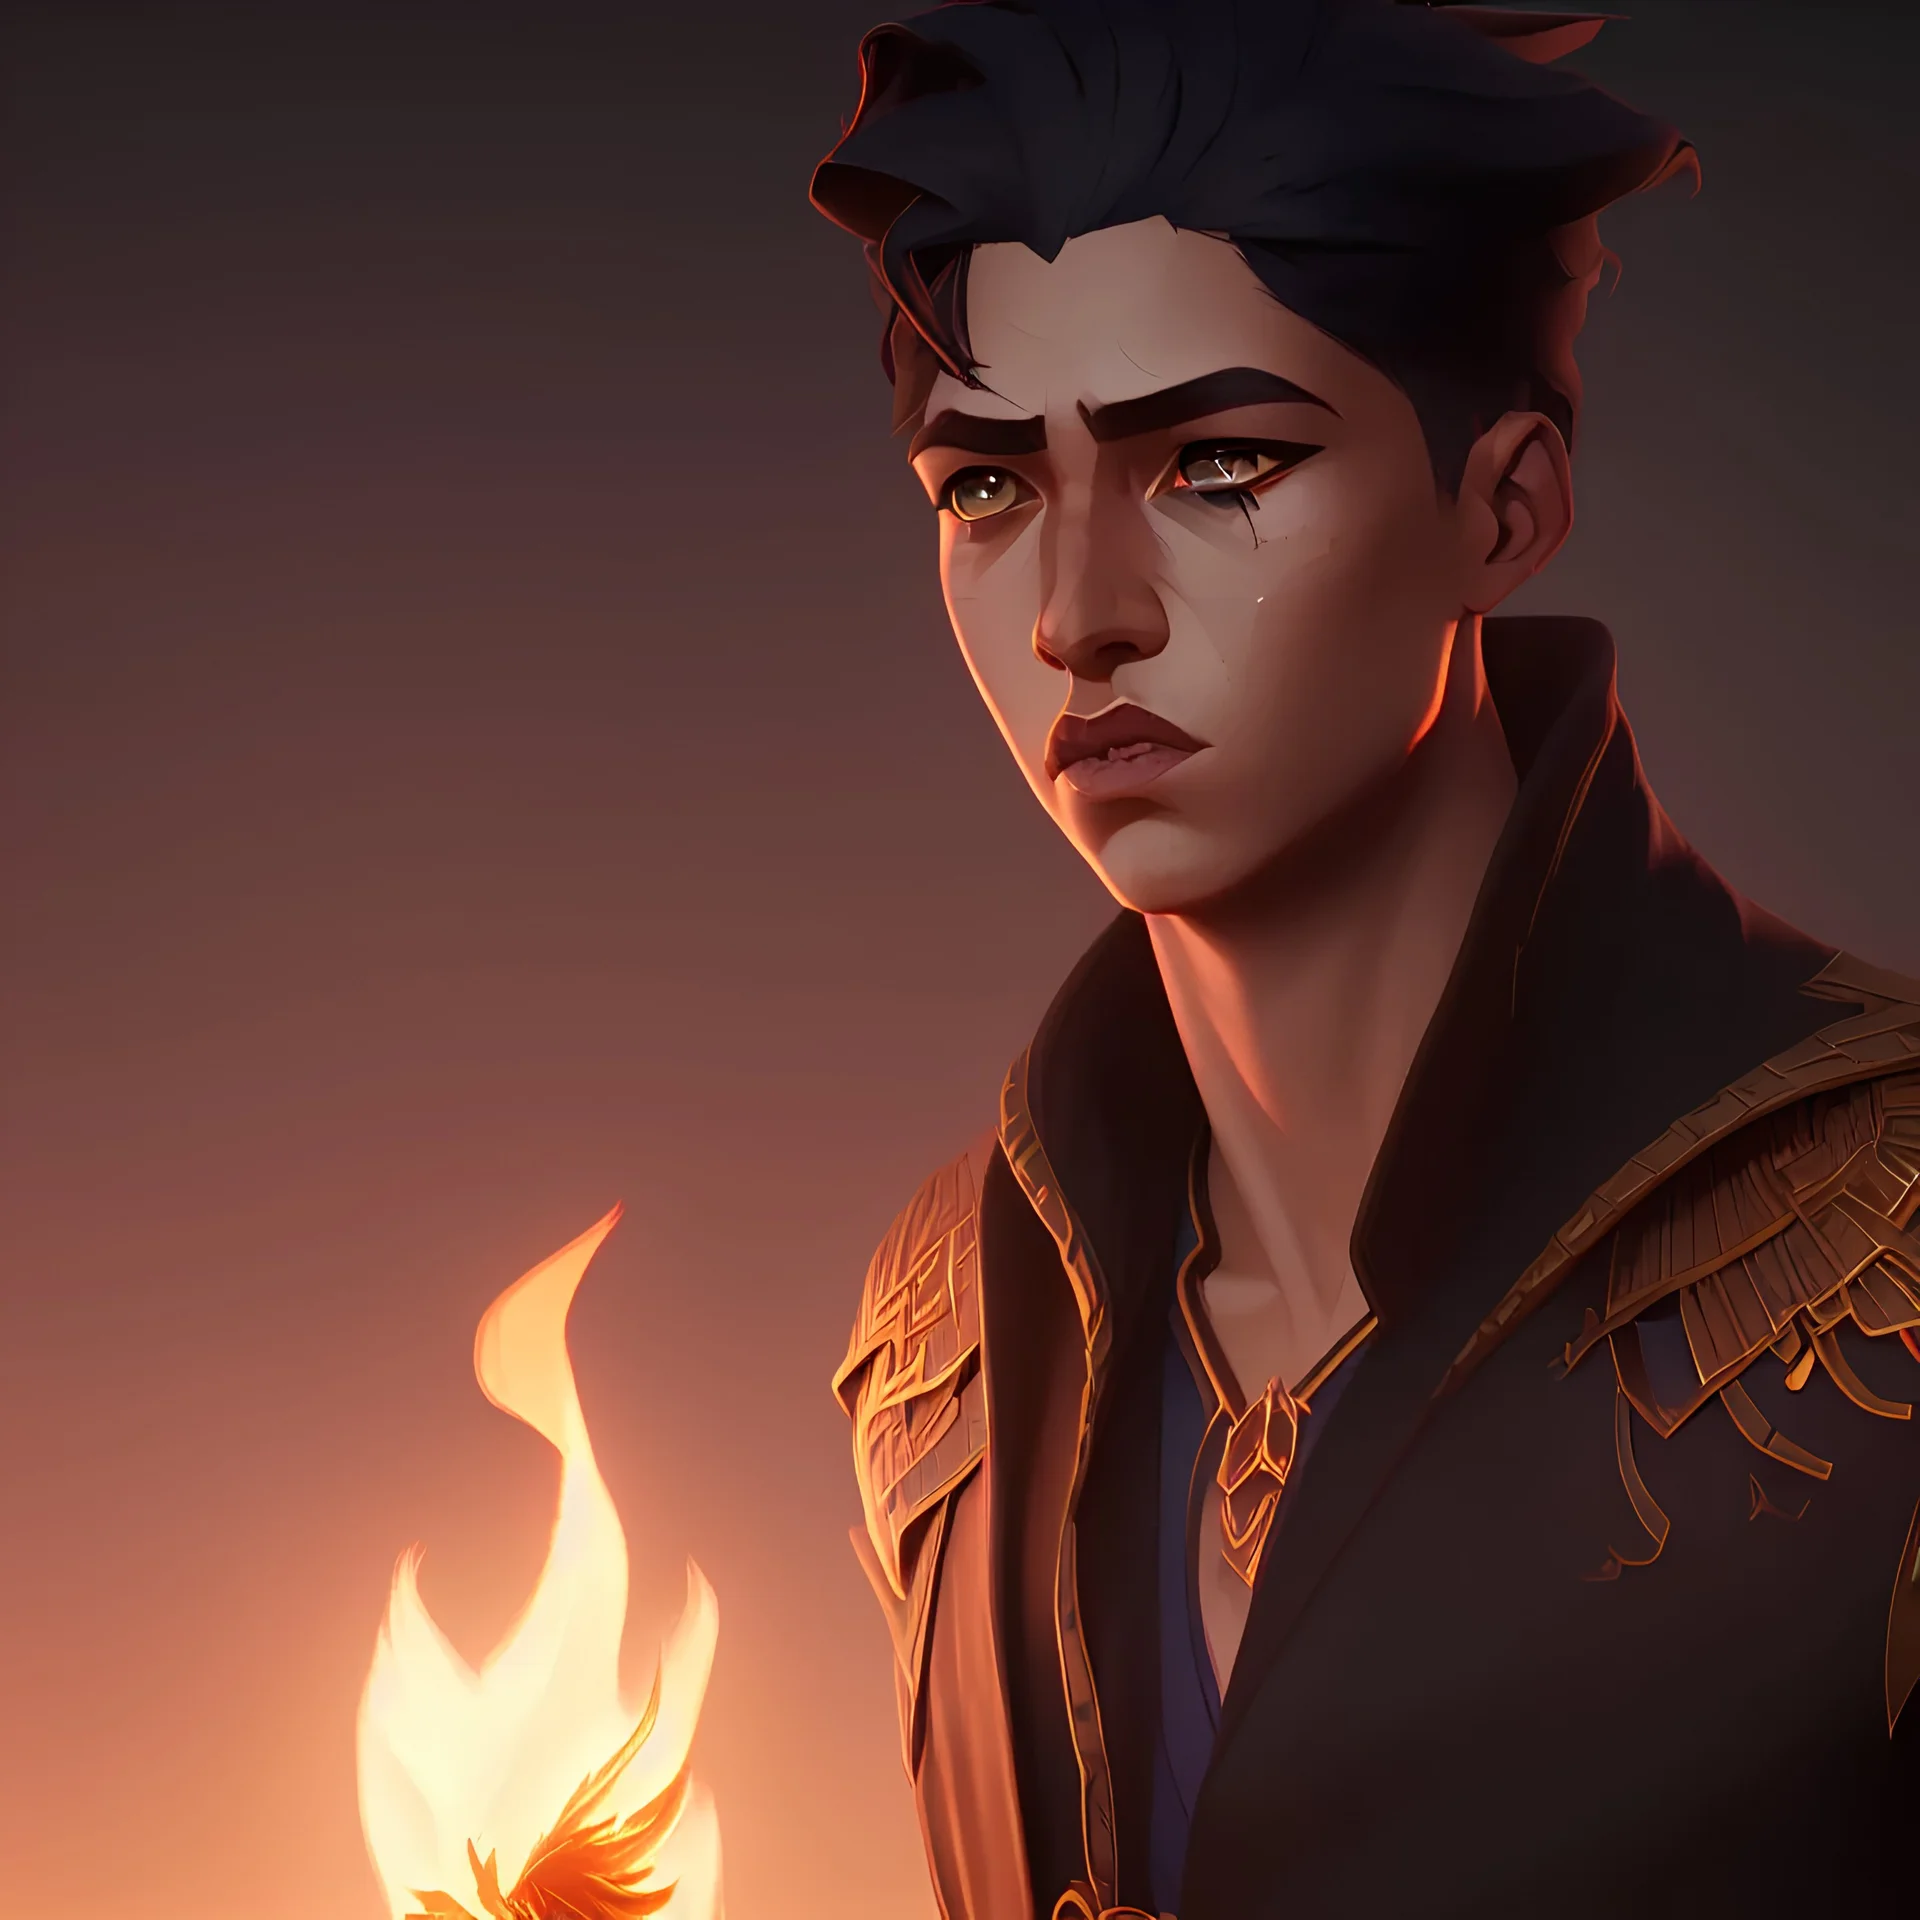 young man, short dark hair, ancient Egypt, feather earring, flames as clouds, magnificent, majestic, highly intricate, incredibly detailed, ultra high resolution, complex 3d render,